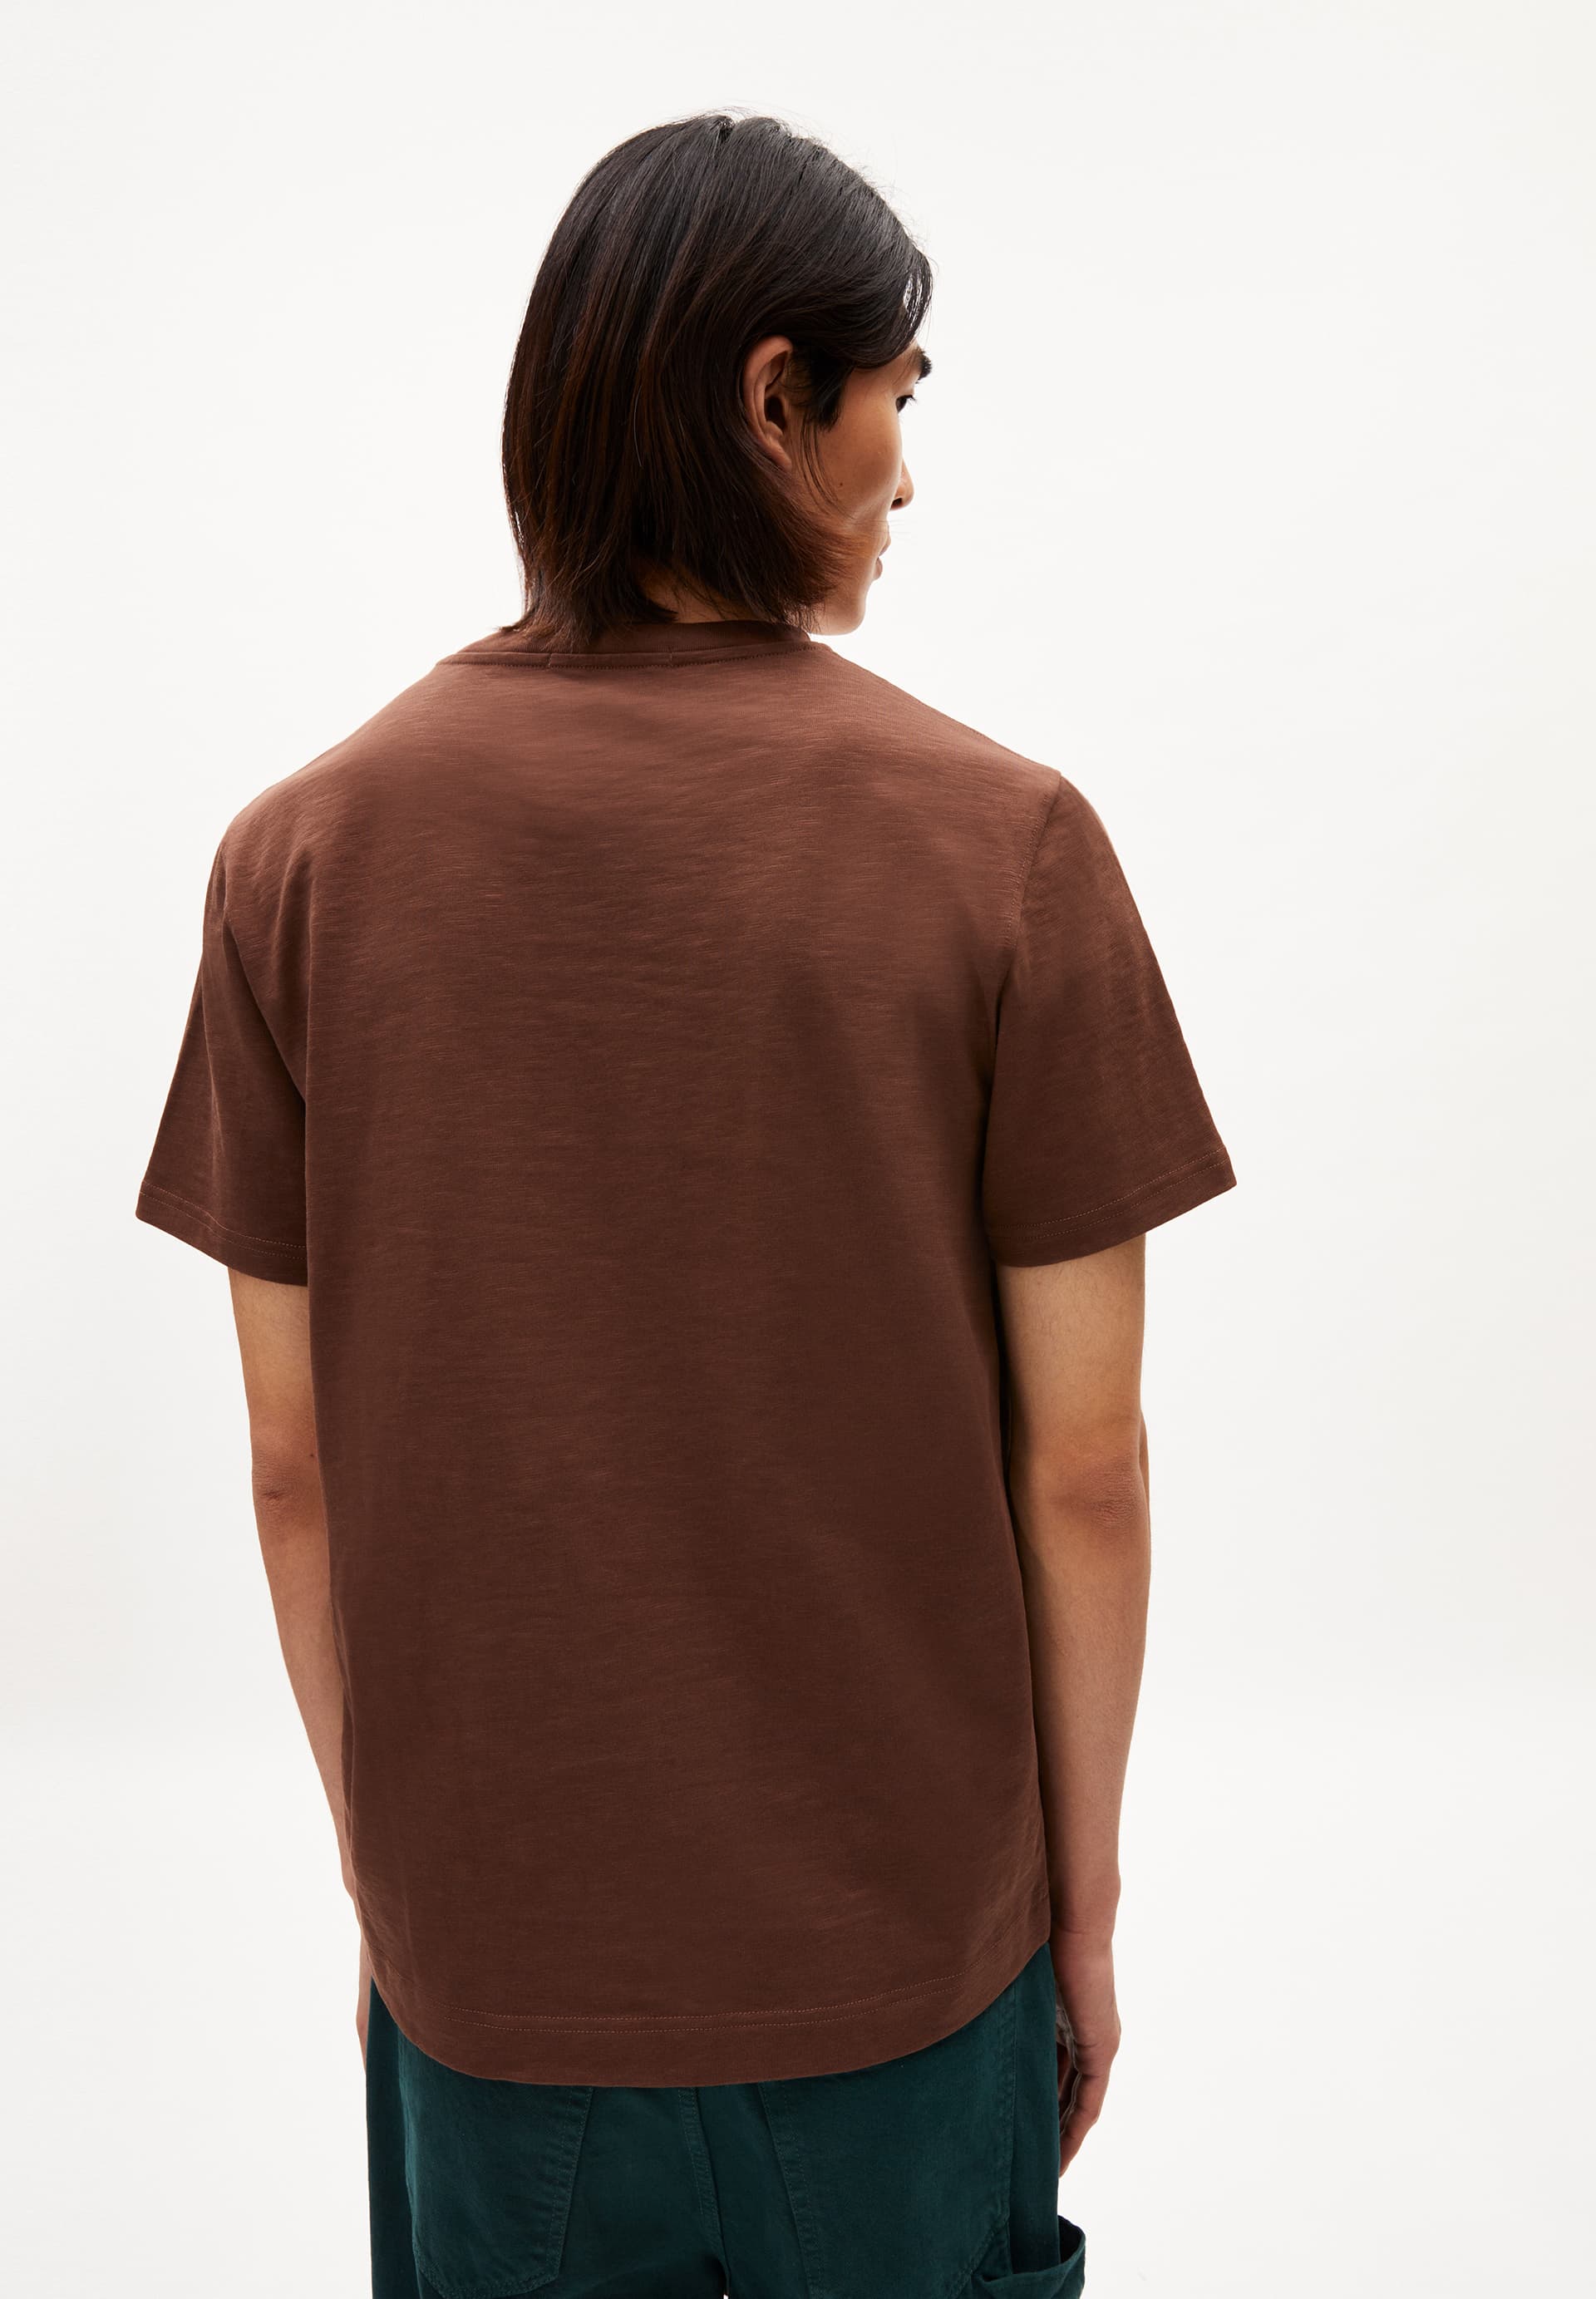 BAZAAO FLAMÉ T-Shirt Relaxed Fit made of Organic Cotton